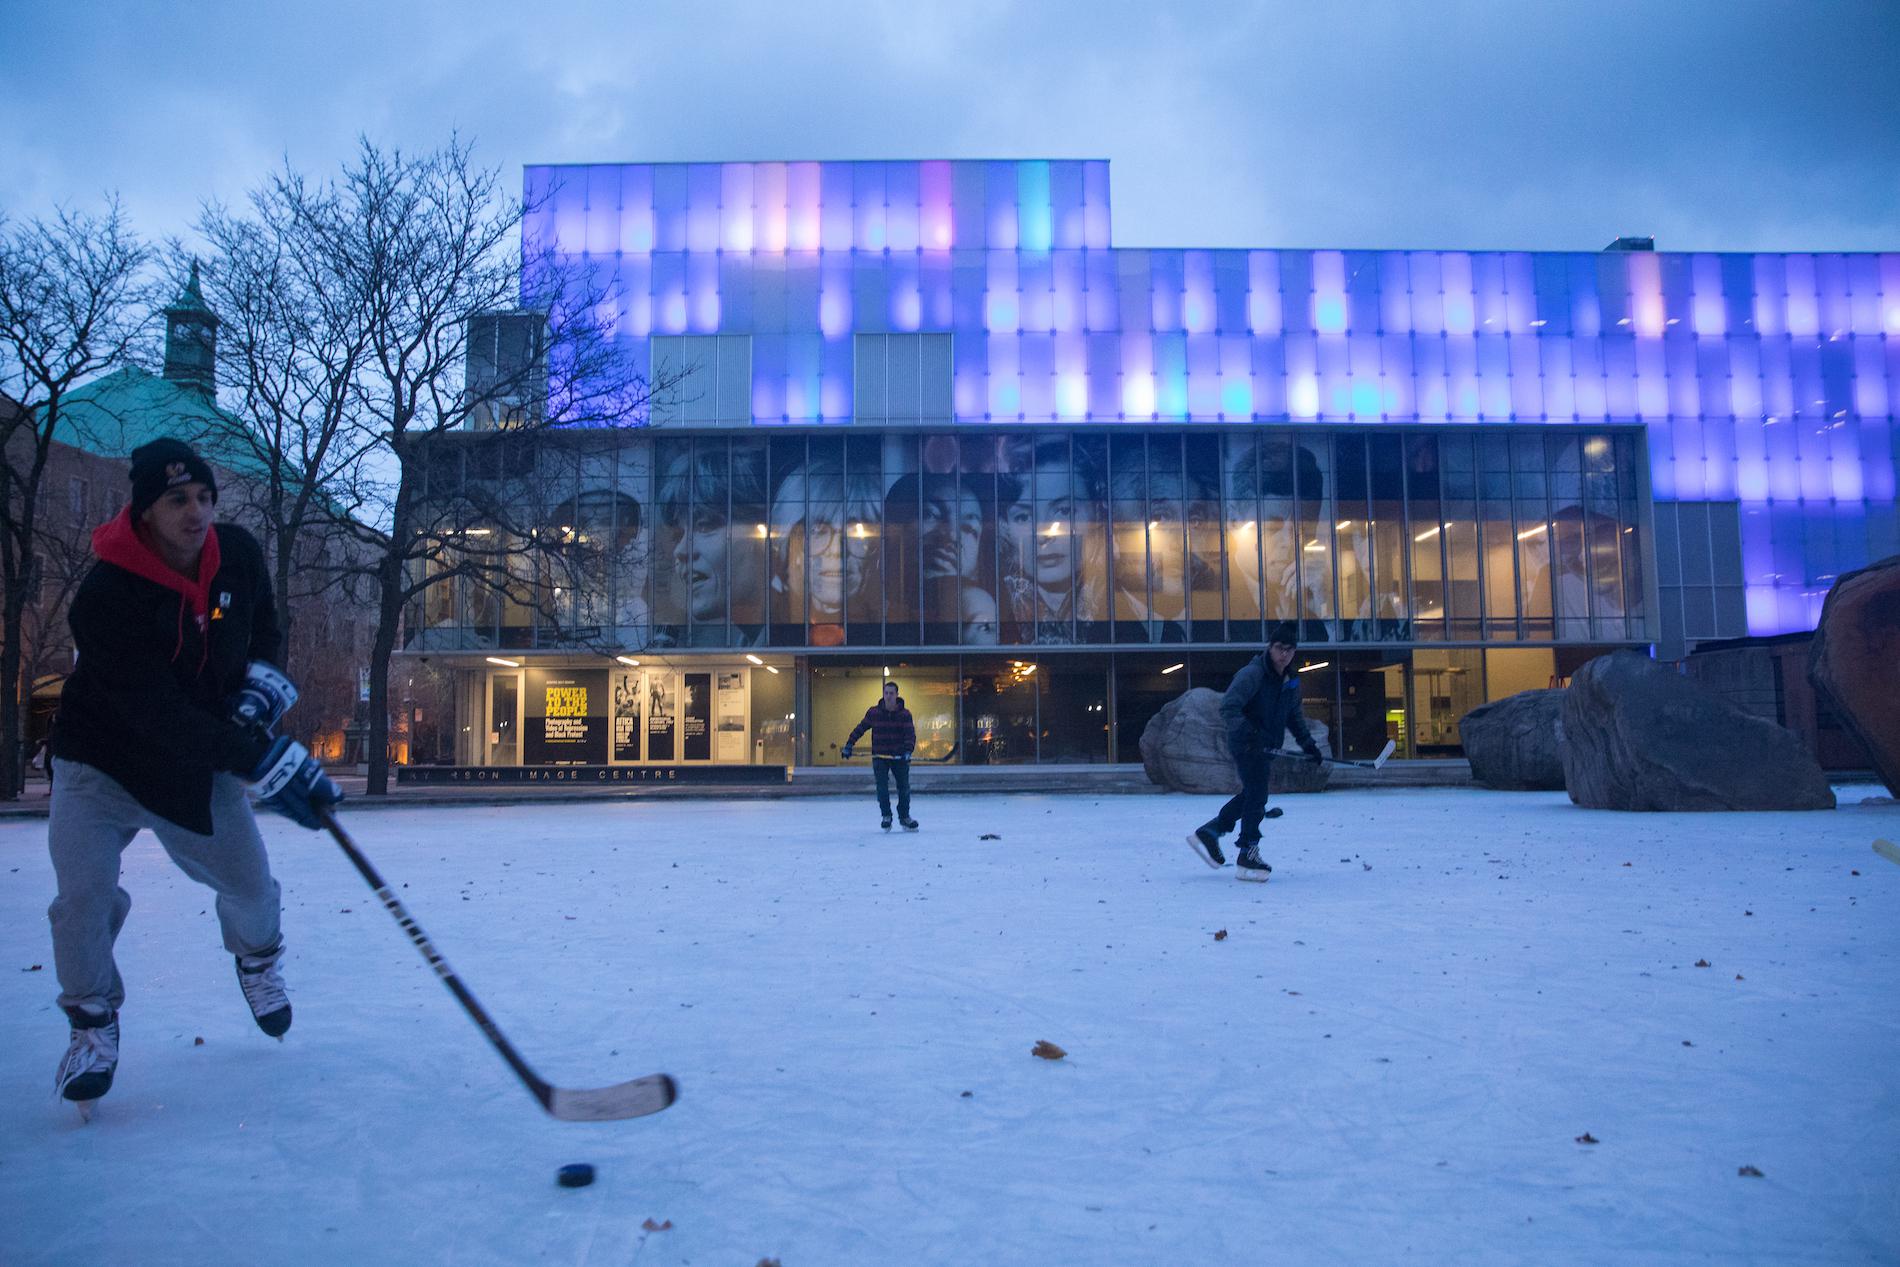 A group of boys play hockey outside the Ryerson Image Centre